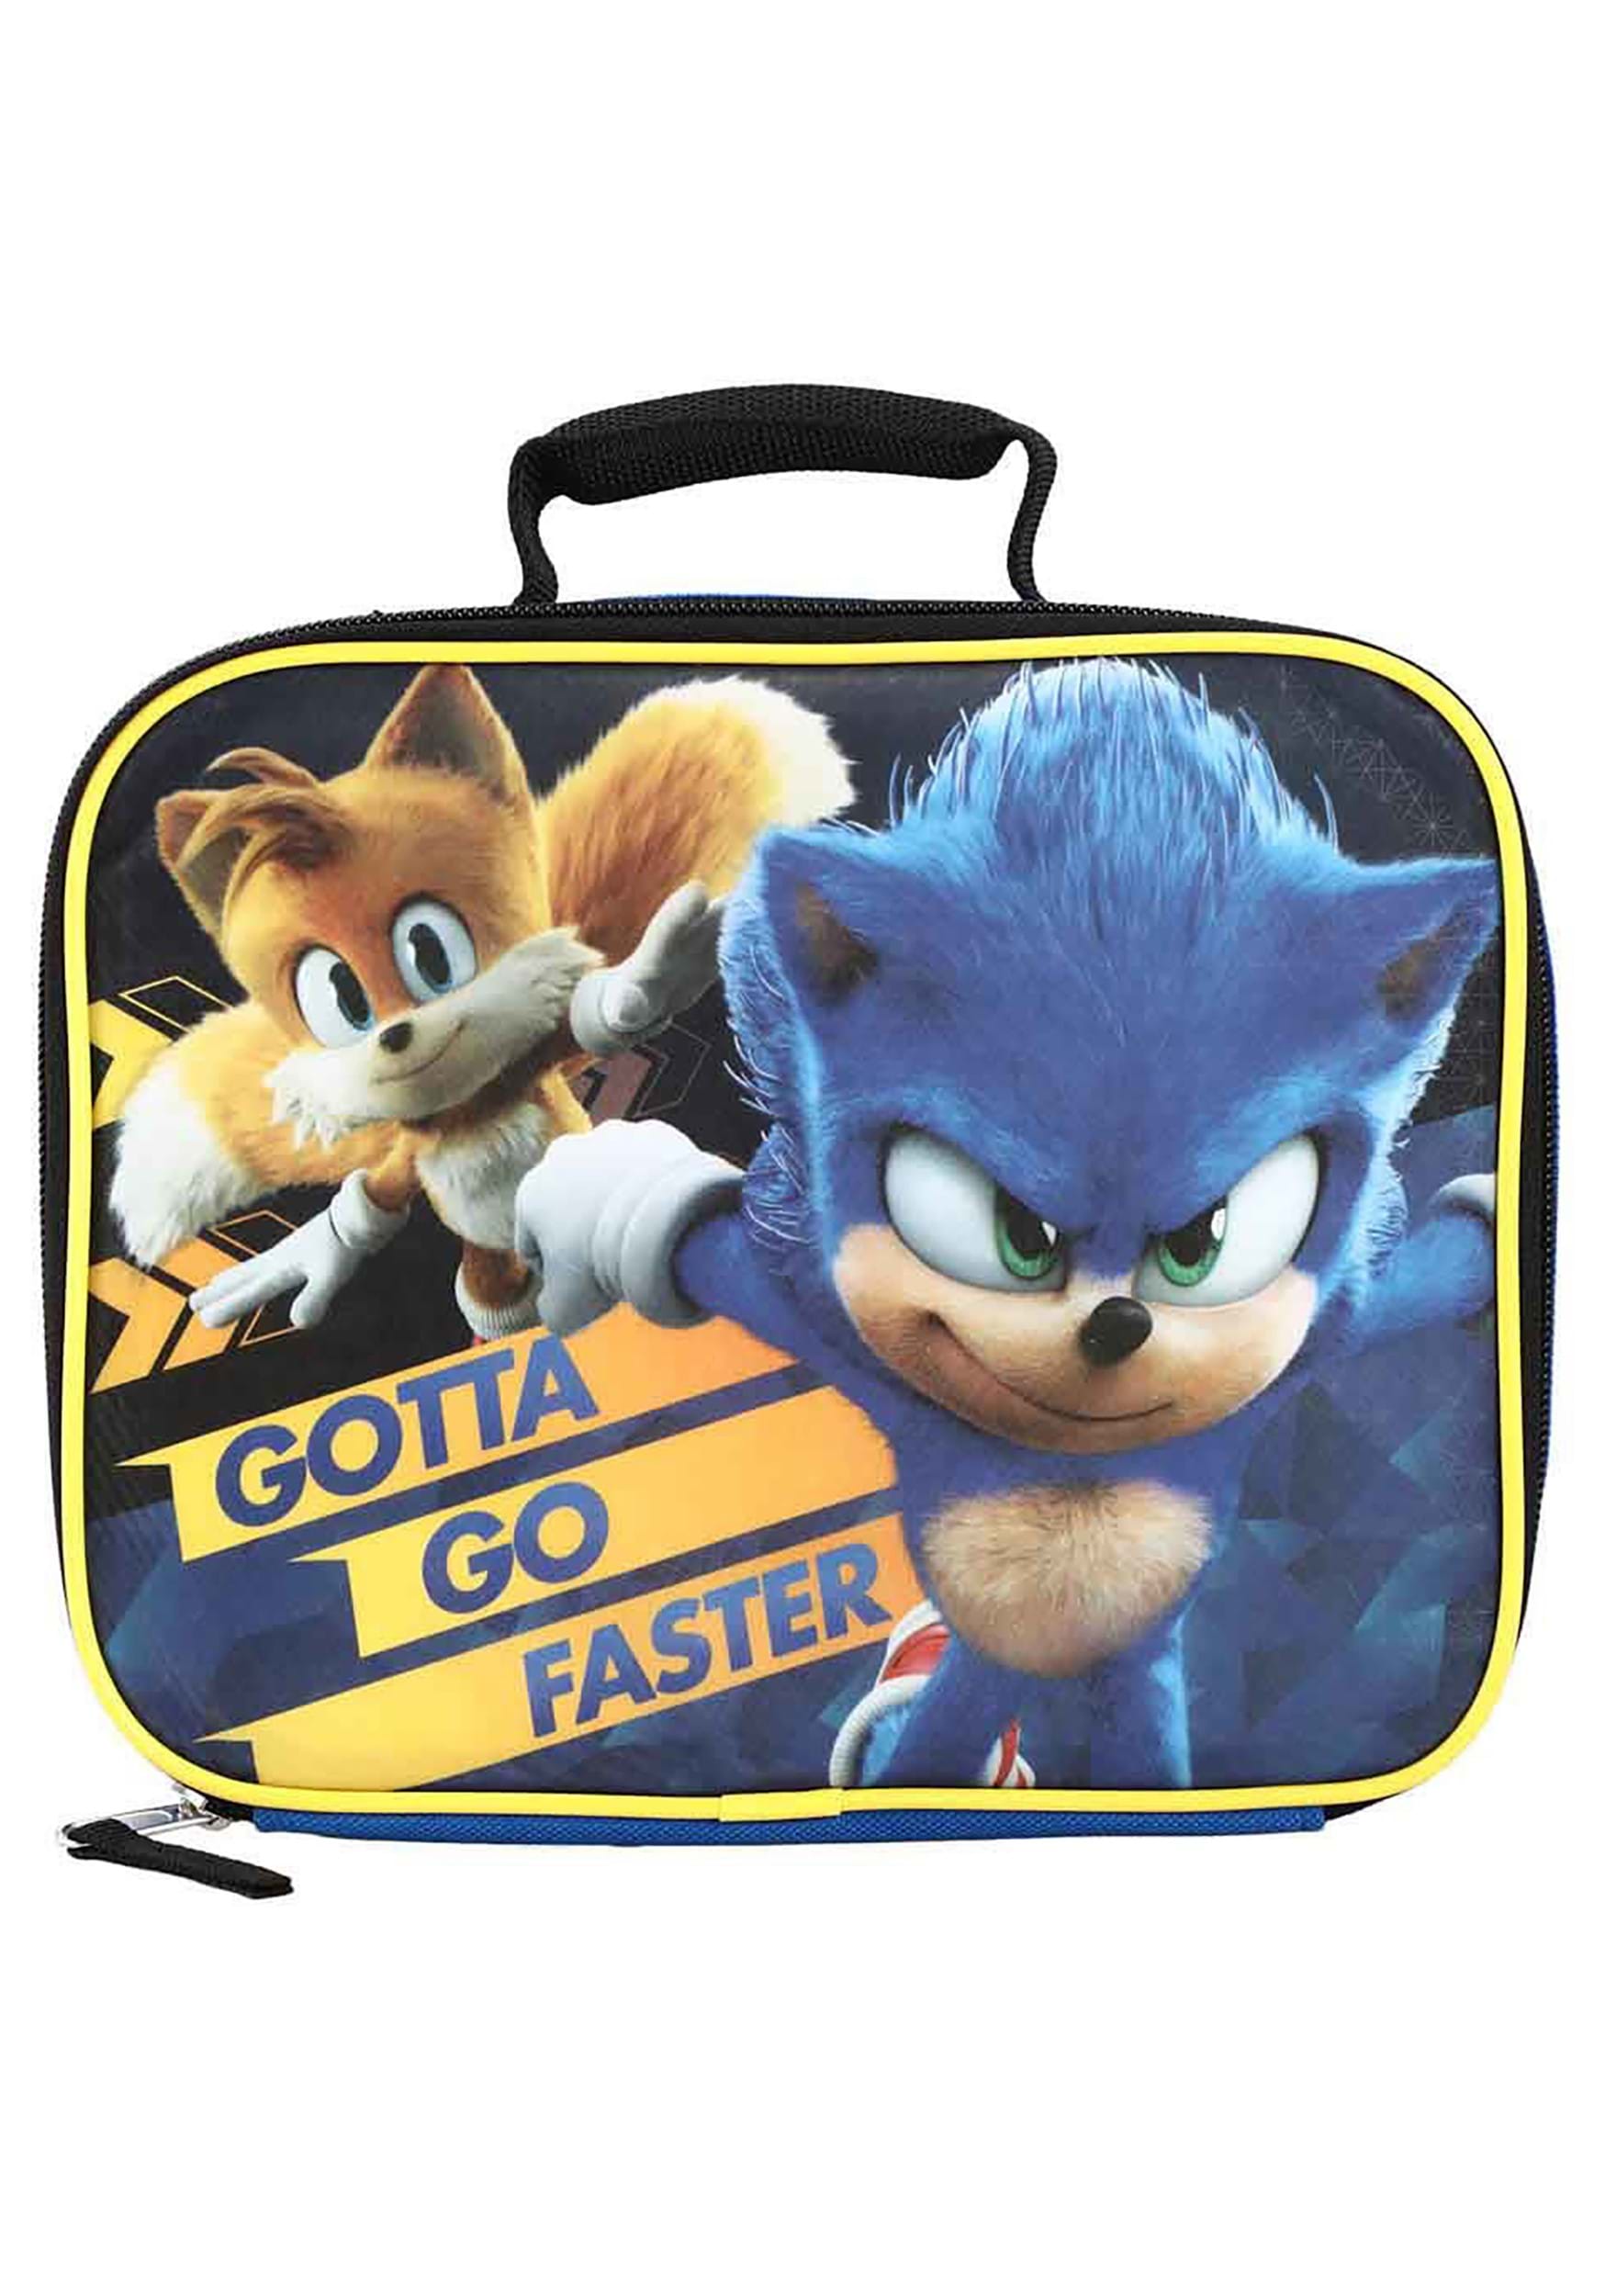 Sonic the Hedgehog Gotta Go Faster Lunch Tote